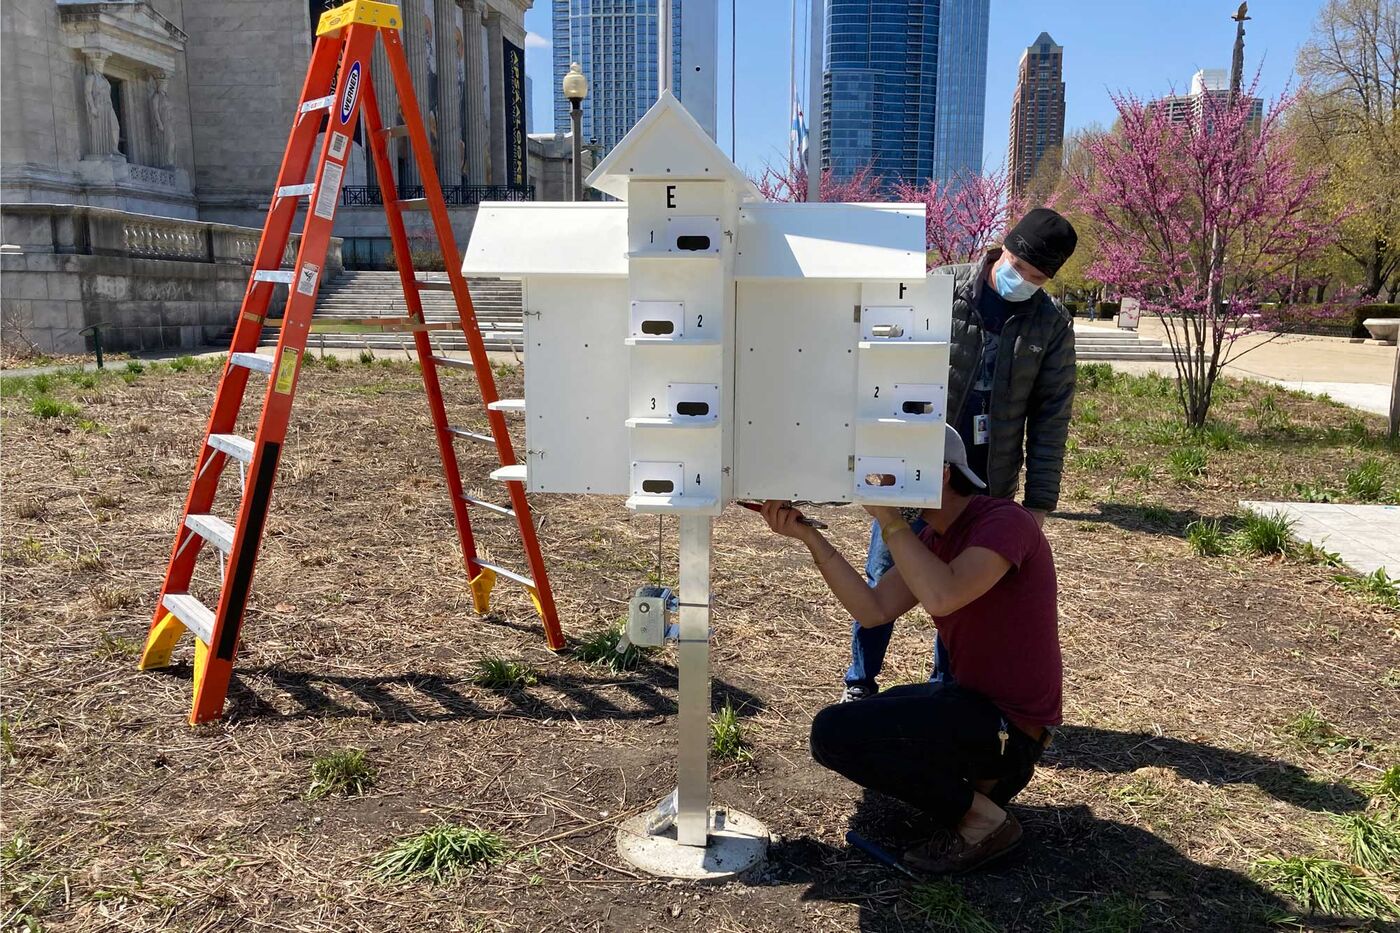 Two people work on a large white birdhouse that has multiple holes. A ladder is next to them and the Field Museum is in the background.